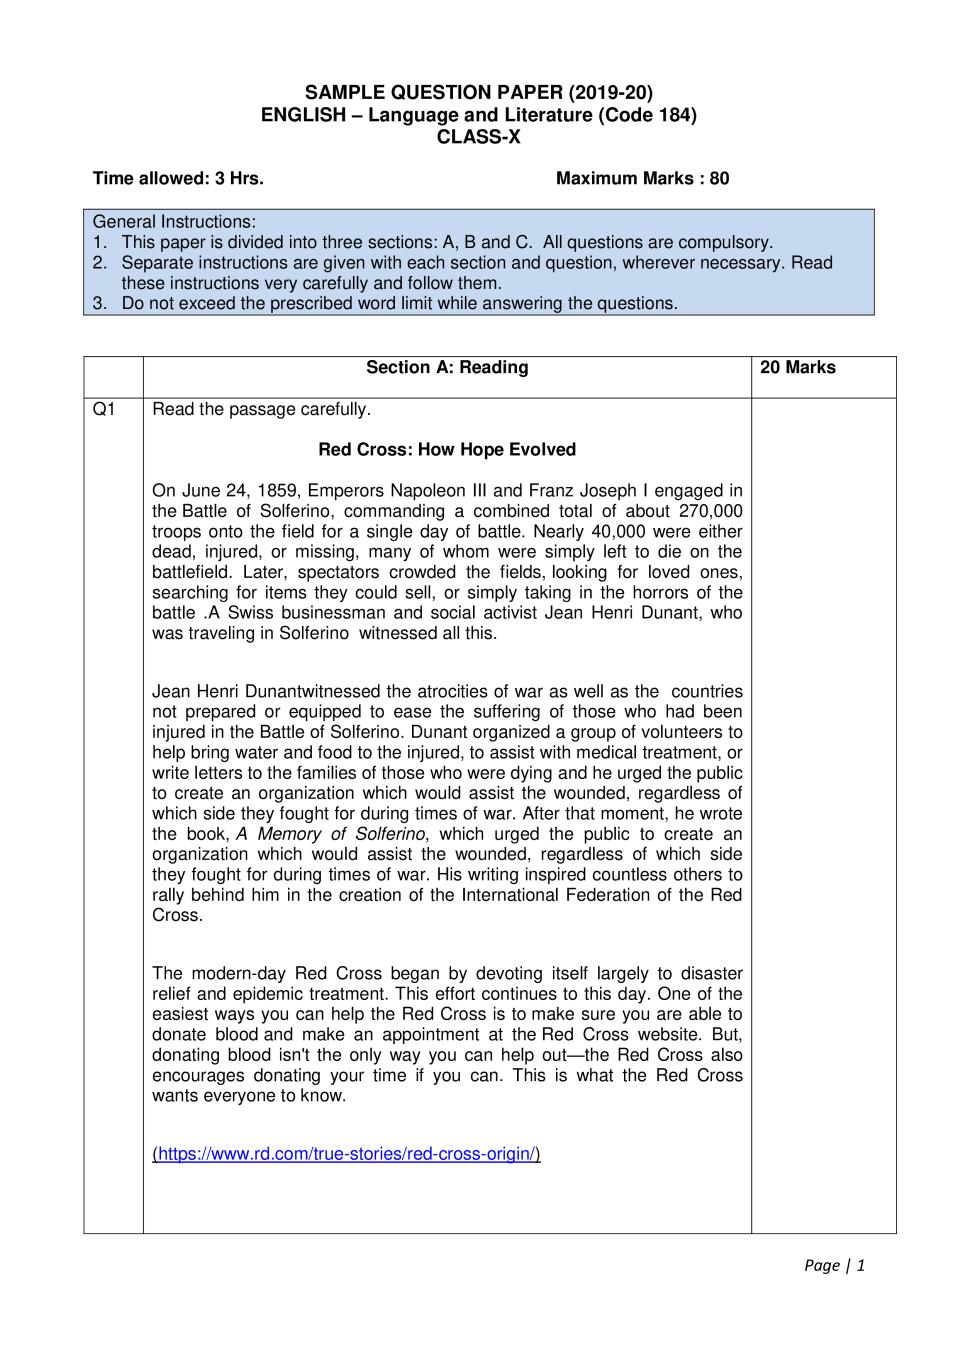 CBSE Class 10 Sample Paper 2020 for English (Language & Literature) - Page 1